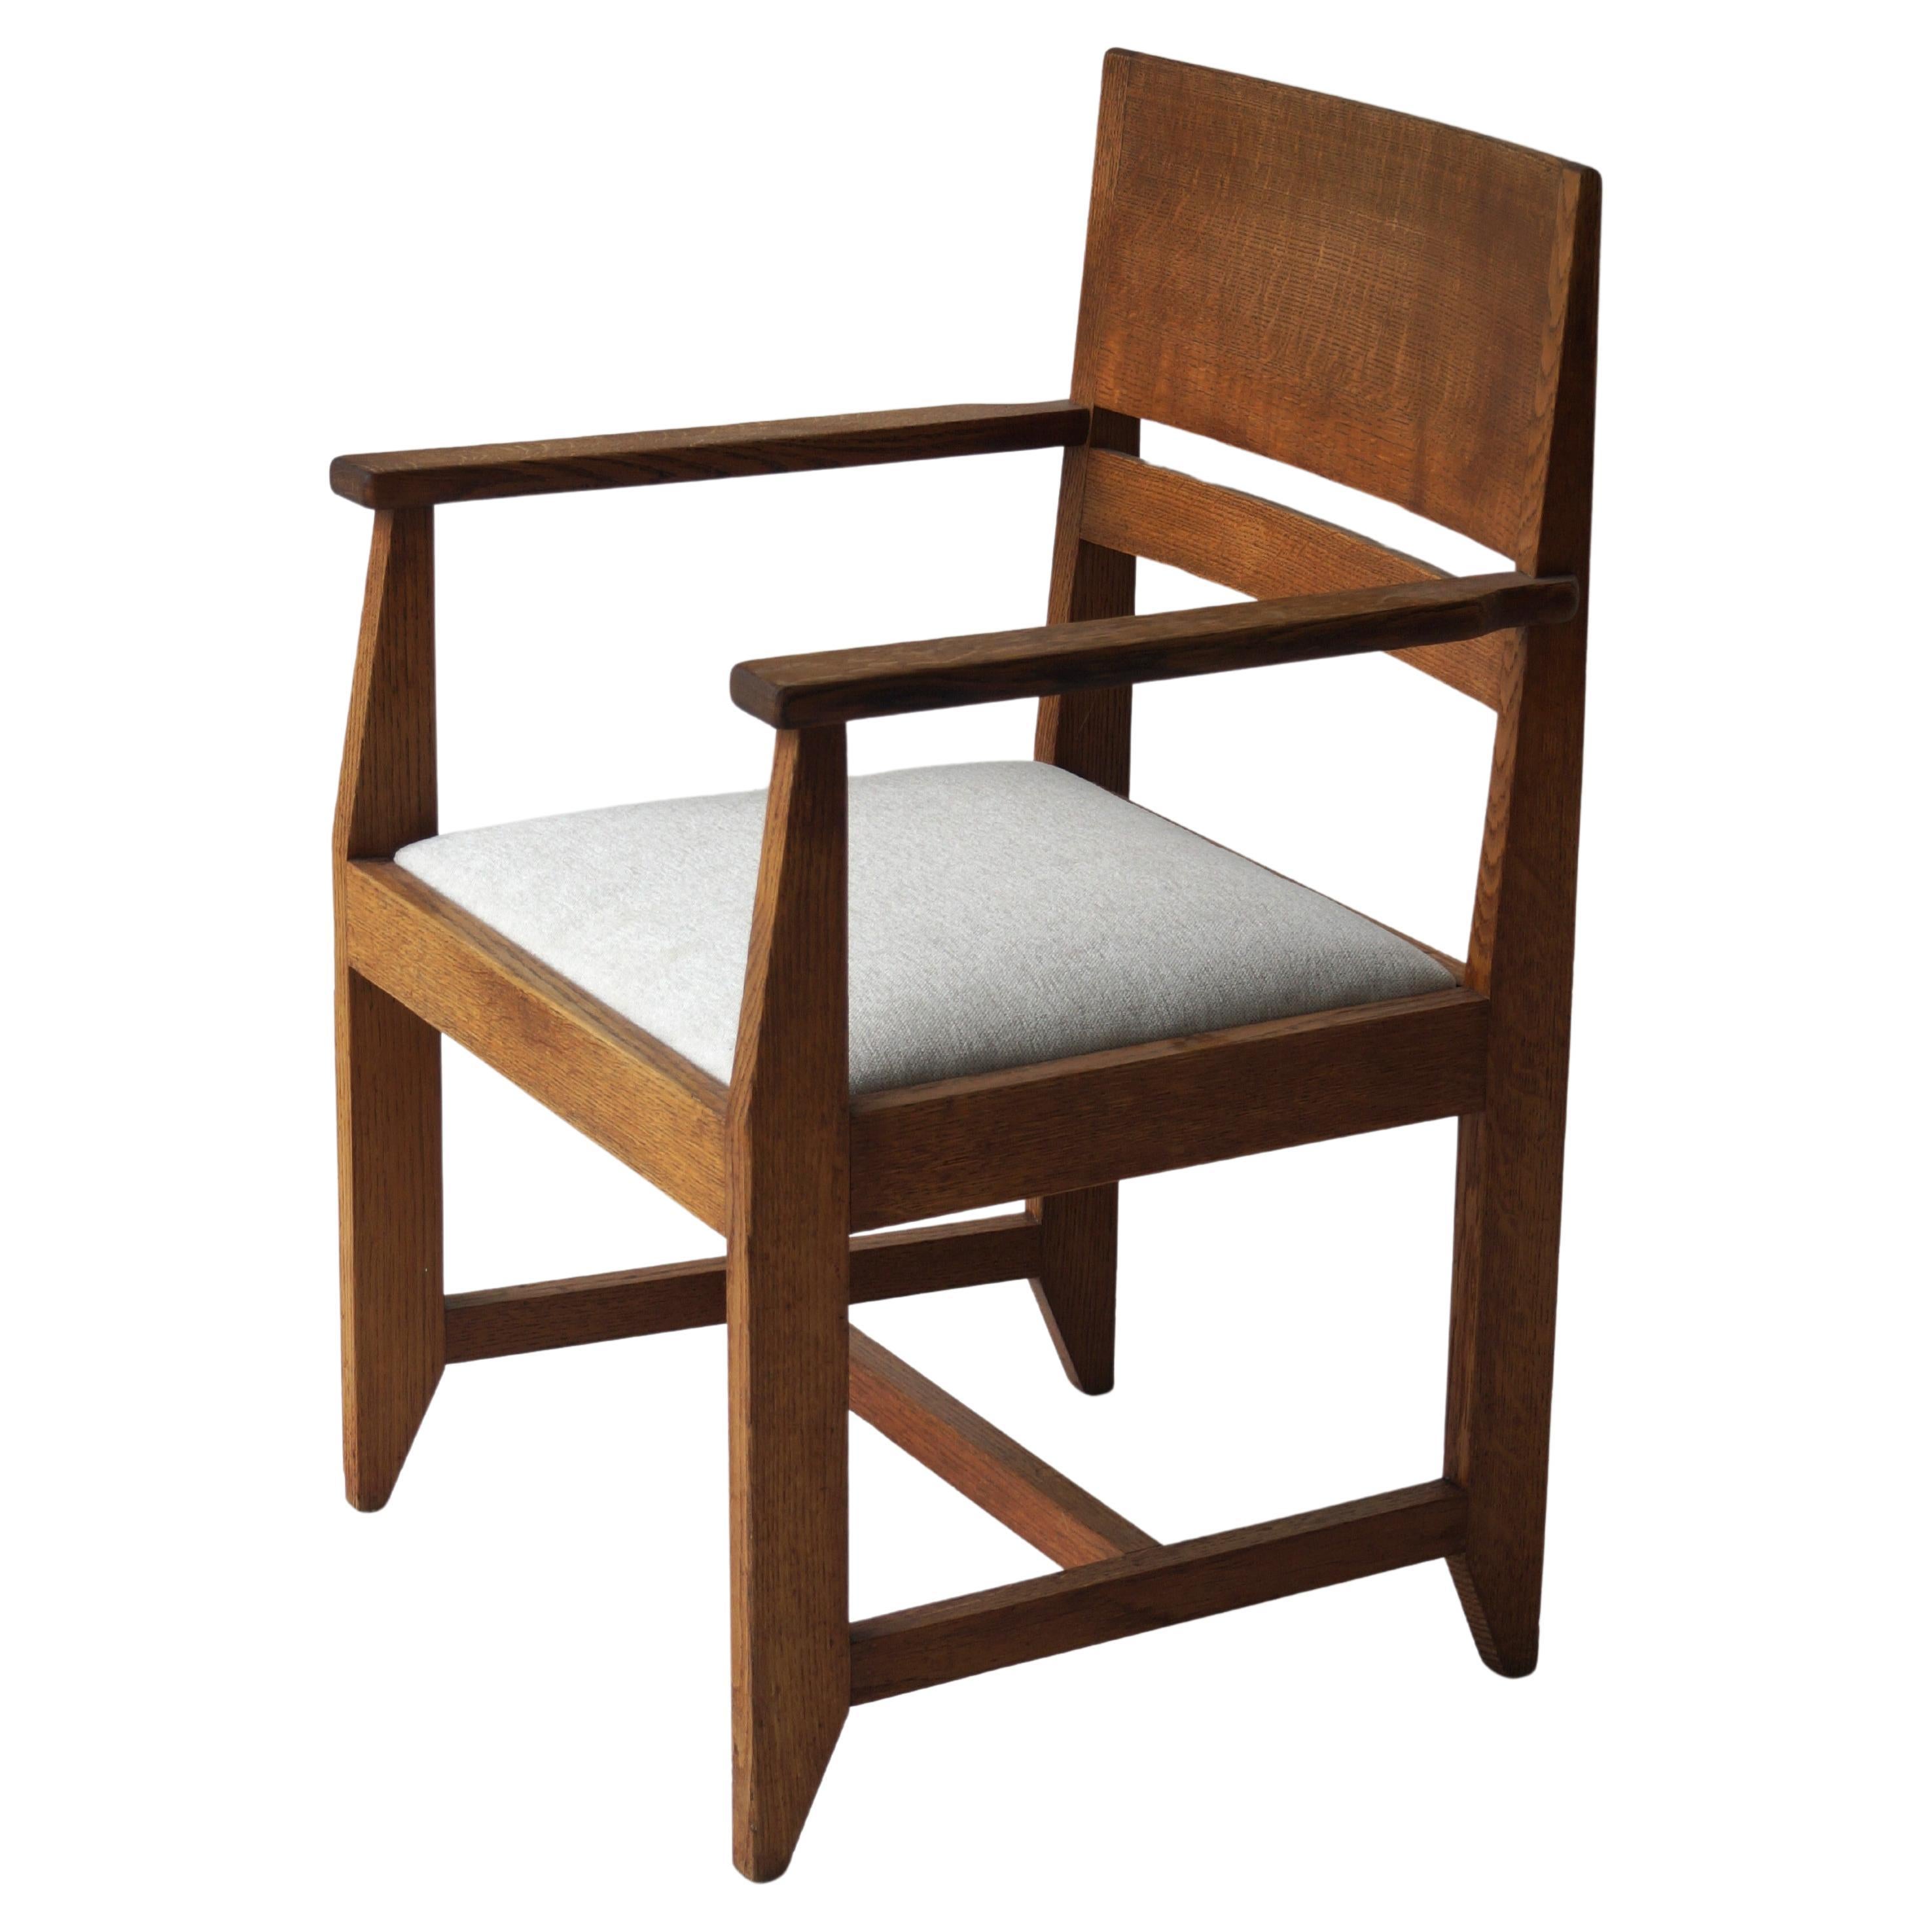 Rationalist/Haagse School armchair, designed by Dutch architect Hendrik Wouda for Pander, 1920s to 1930s. An almost identical chair is part of the Amsterdam Rijksmuseum collection. See the last picture in the presentation. 

The piece is in very